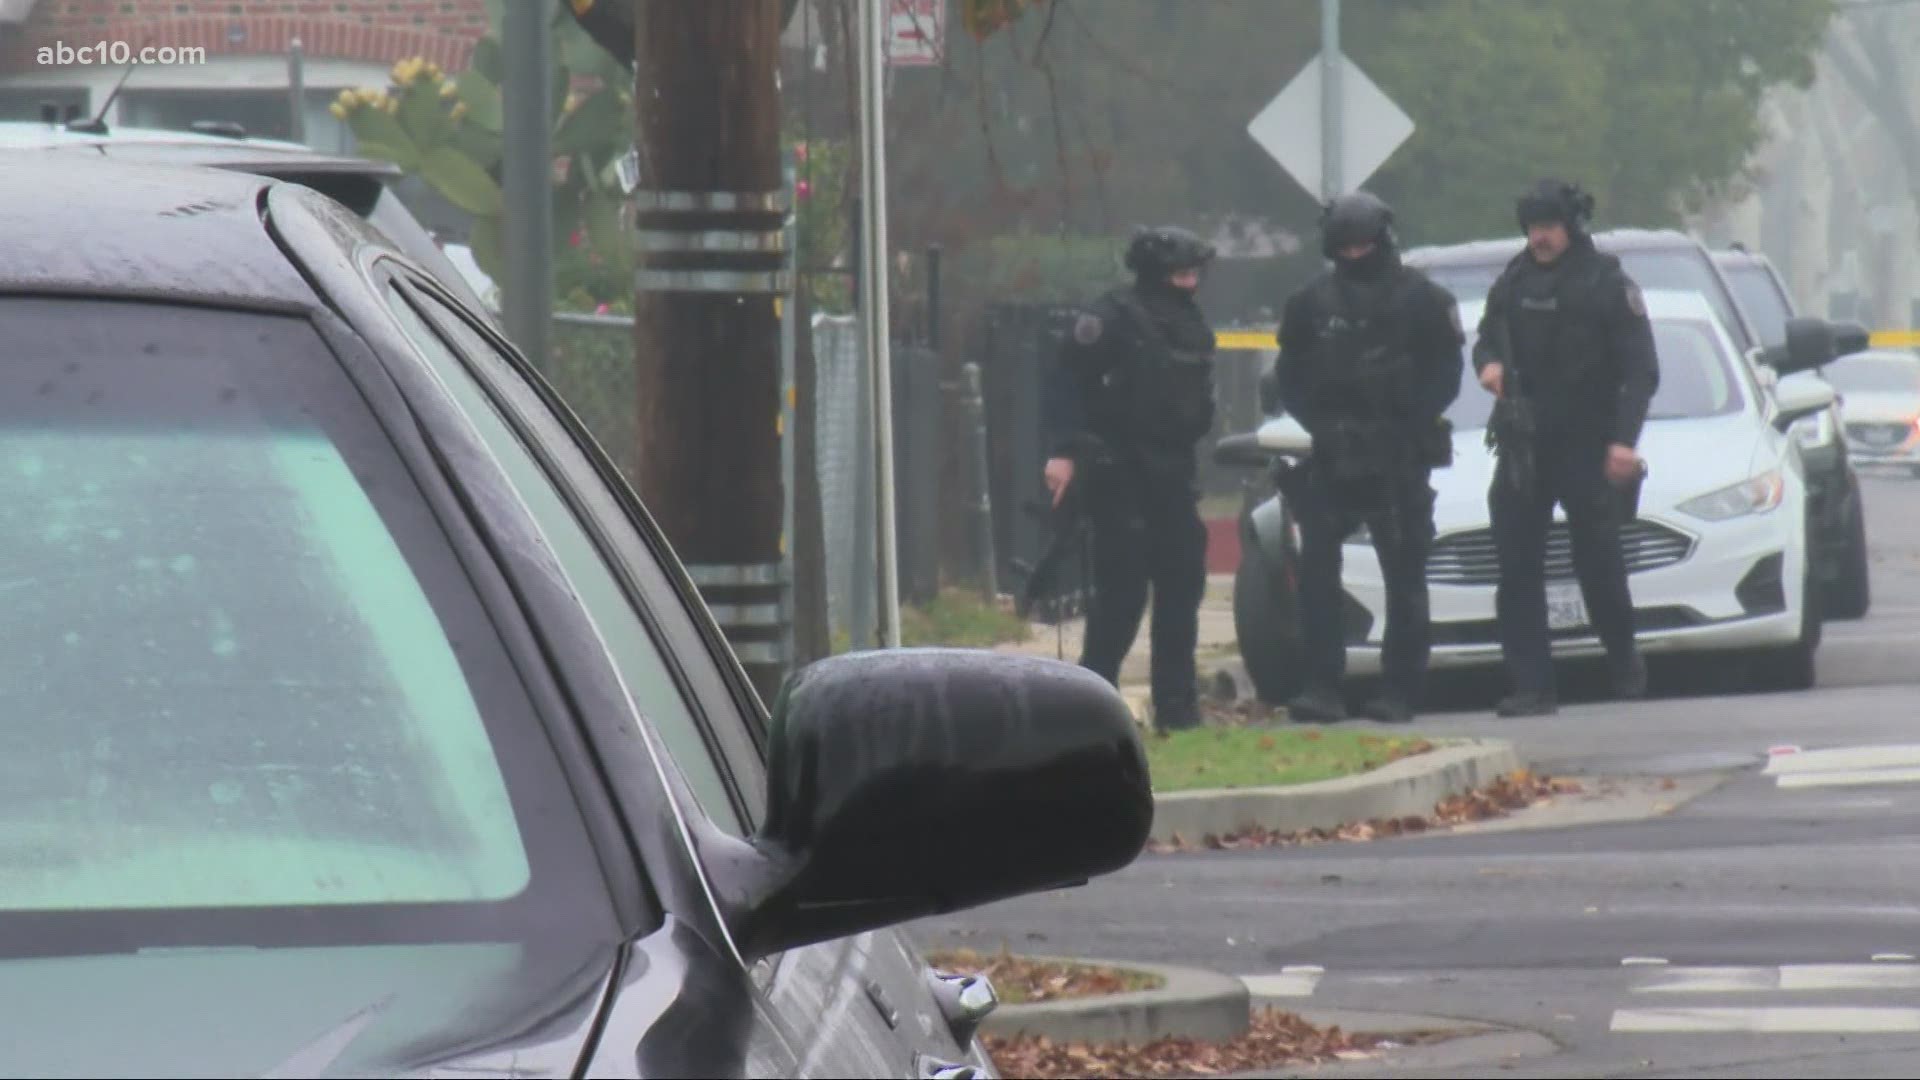 A 15-year-old girl was injured in a shooting on New Year's Day, Sacramento police said.